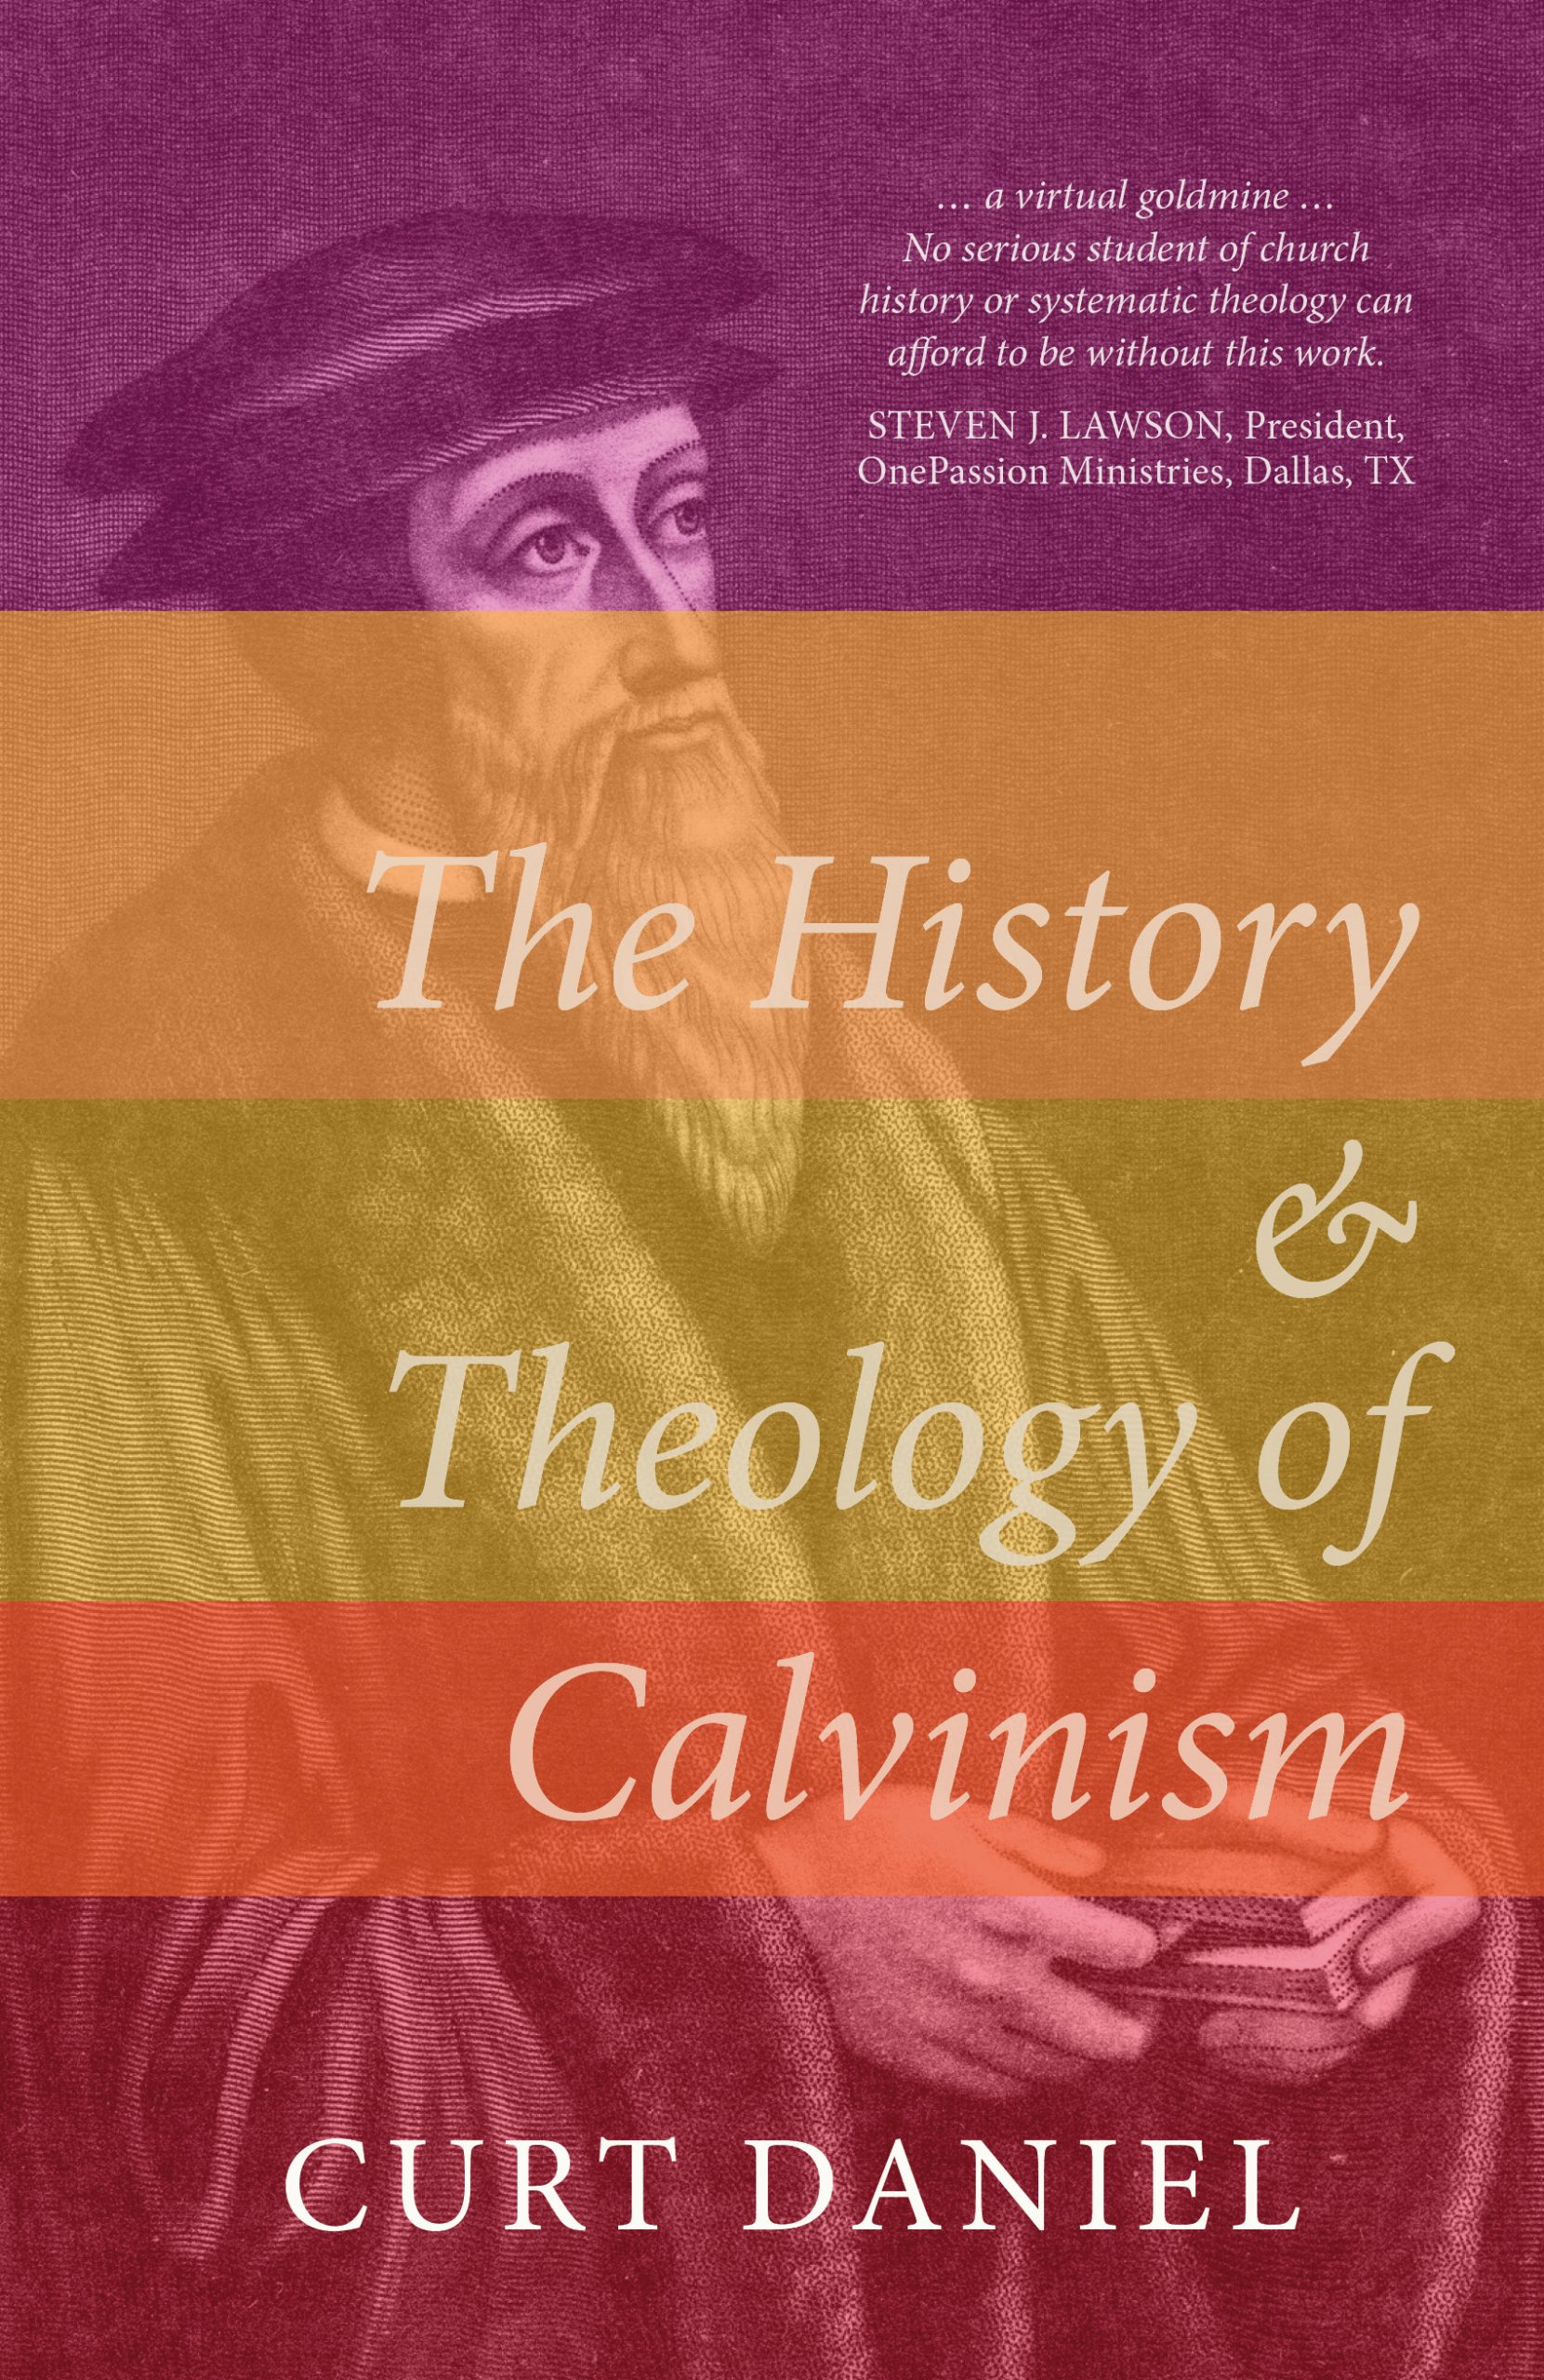 Book Notice: THE HISTORY AND THEOLOGY OF CALVINISM, by Curt Daniel